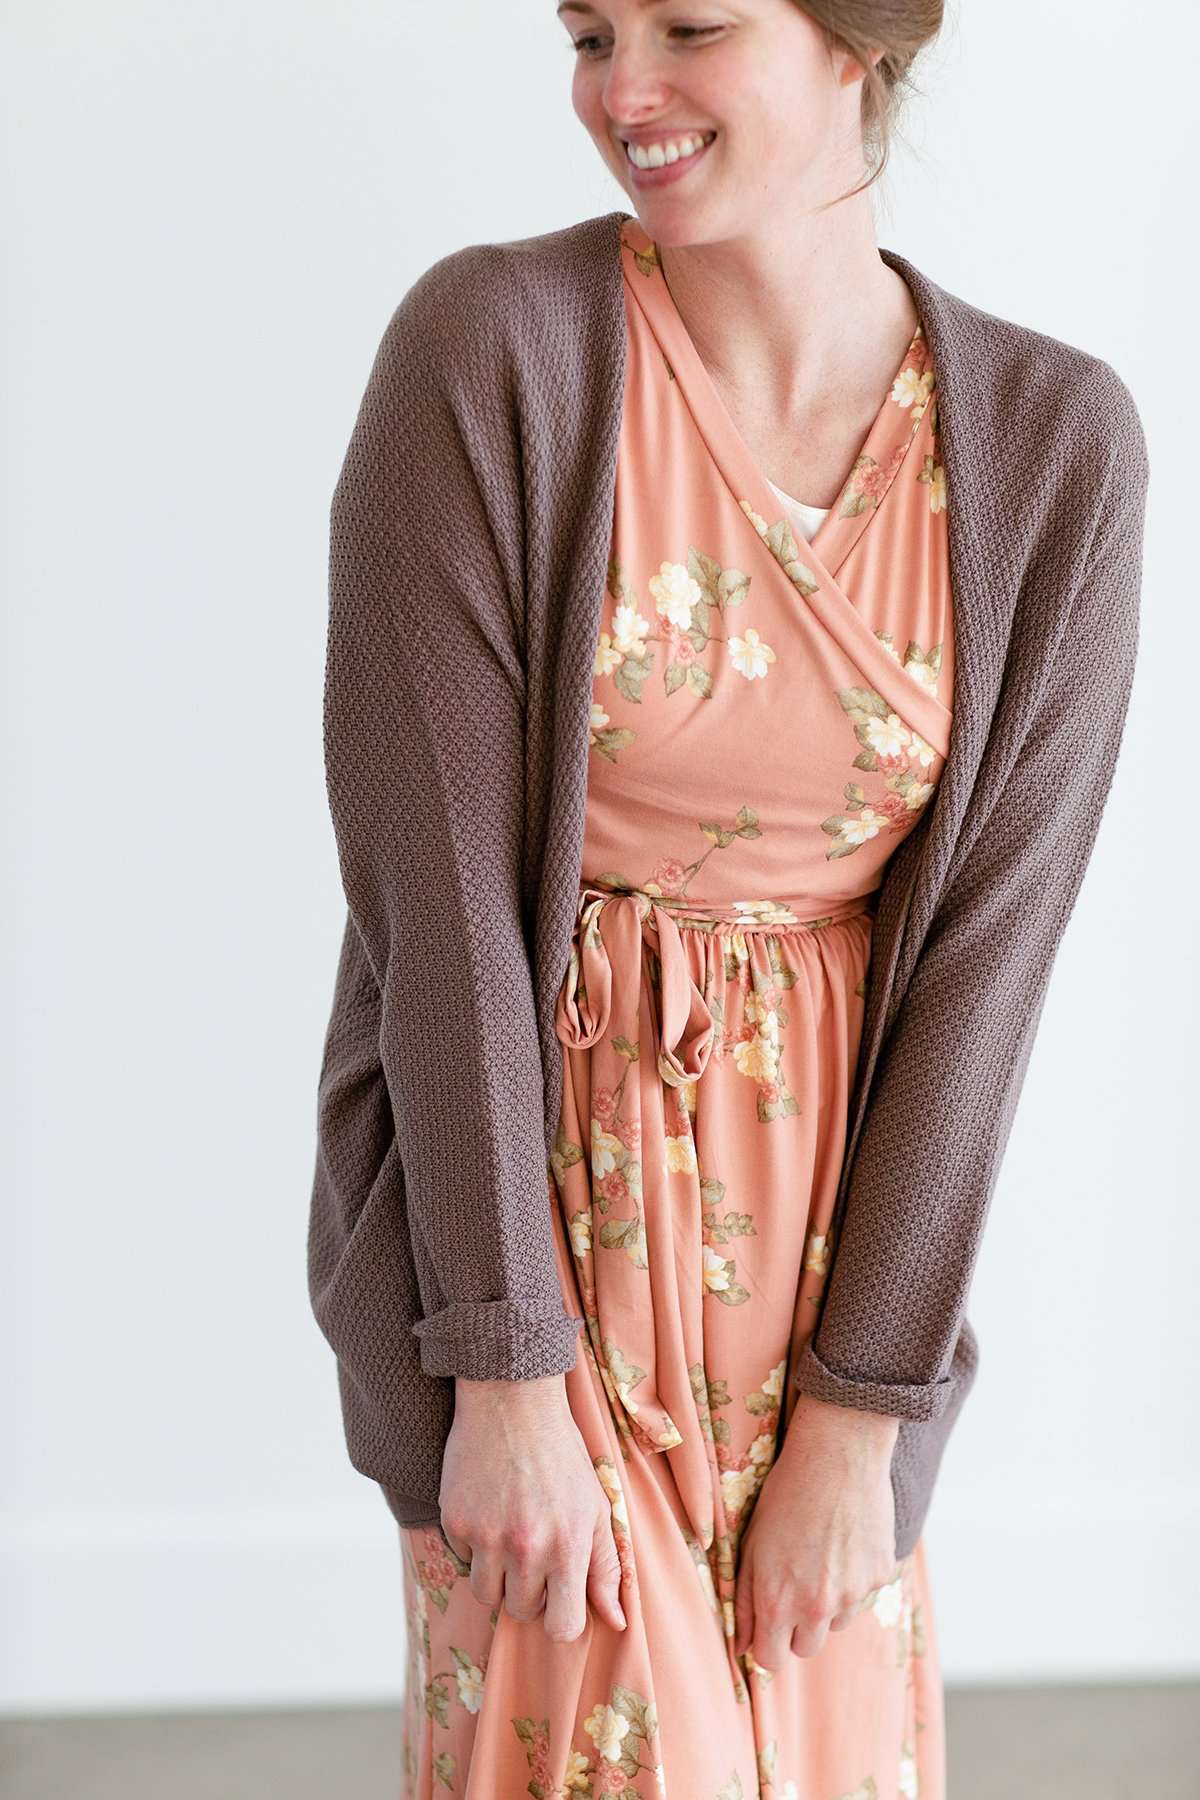 Woman wearing a lightweight knit cardigan in navy, taupe or cream. 